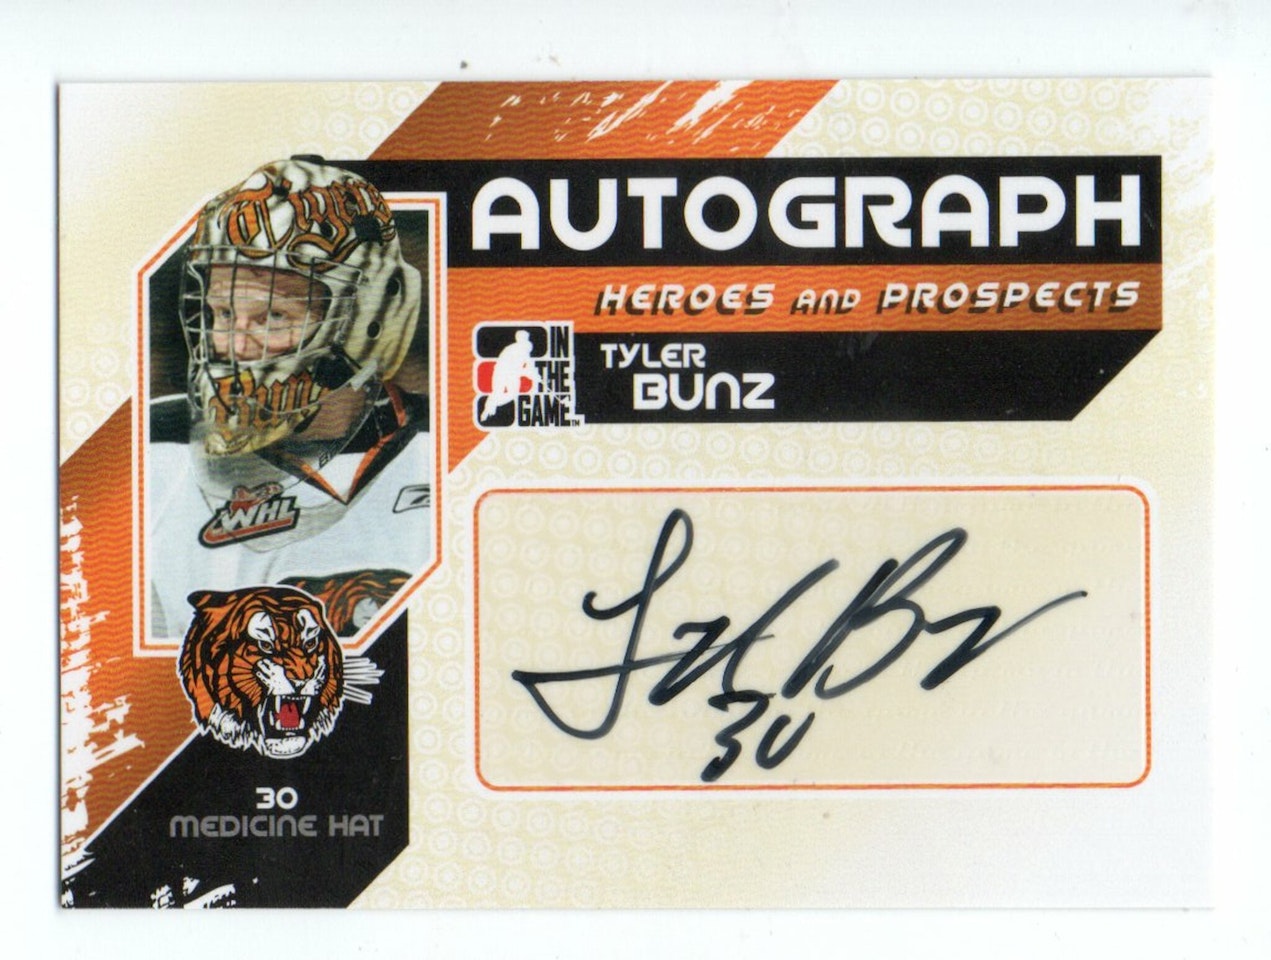 2010-11 ITG Heroes and Prospects Autographs #ATB Tyler Bunz (30-194x9-OTHERS)